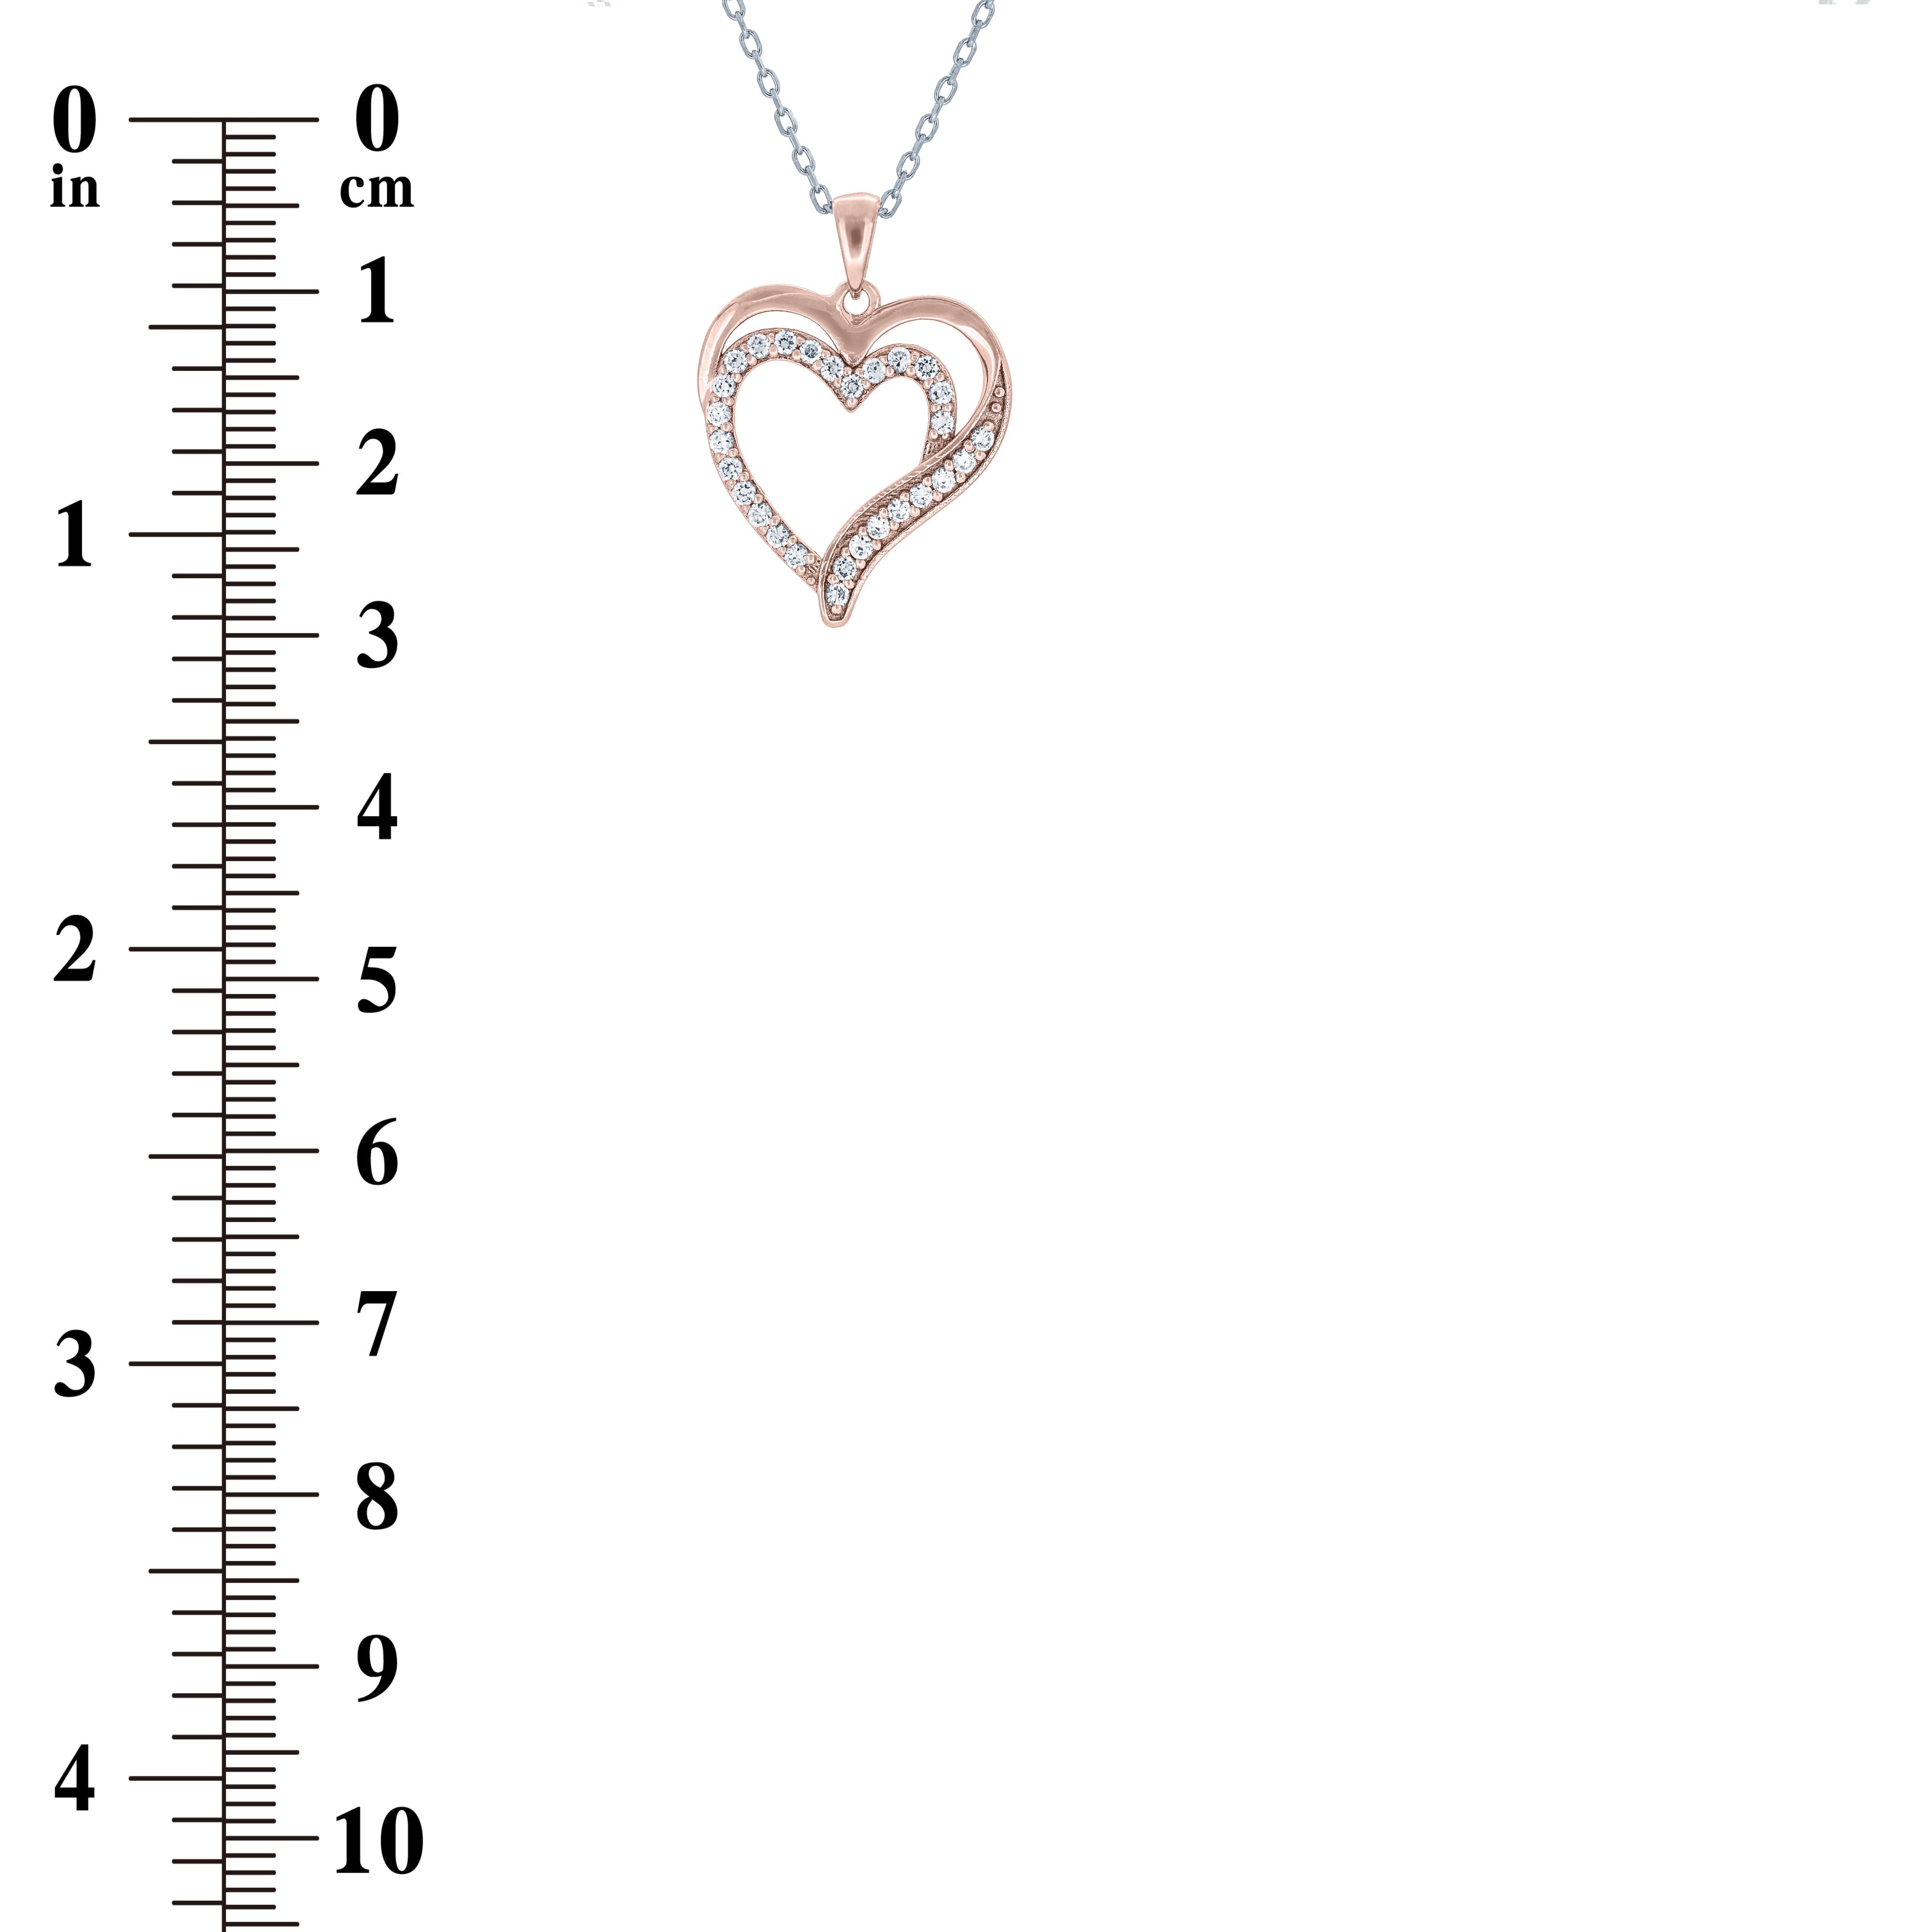 (100017A) White Cubic Zirconia Heart Pendant Necklace In Sterling Silver and Rose Gold Plate